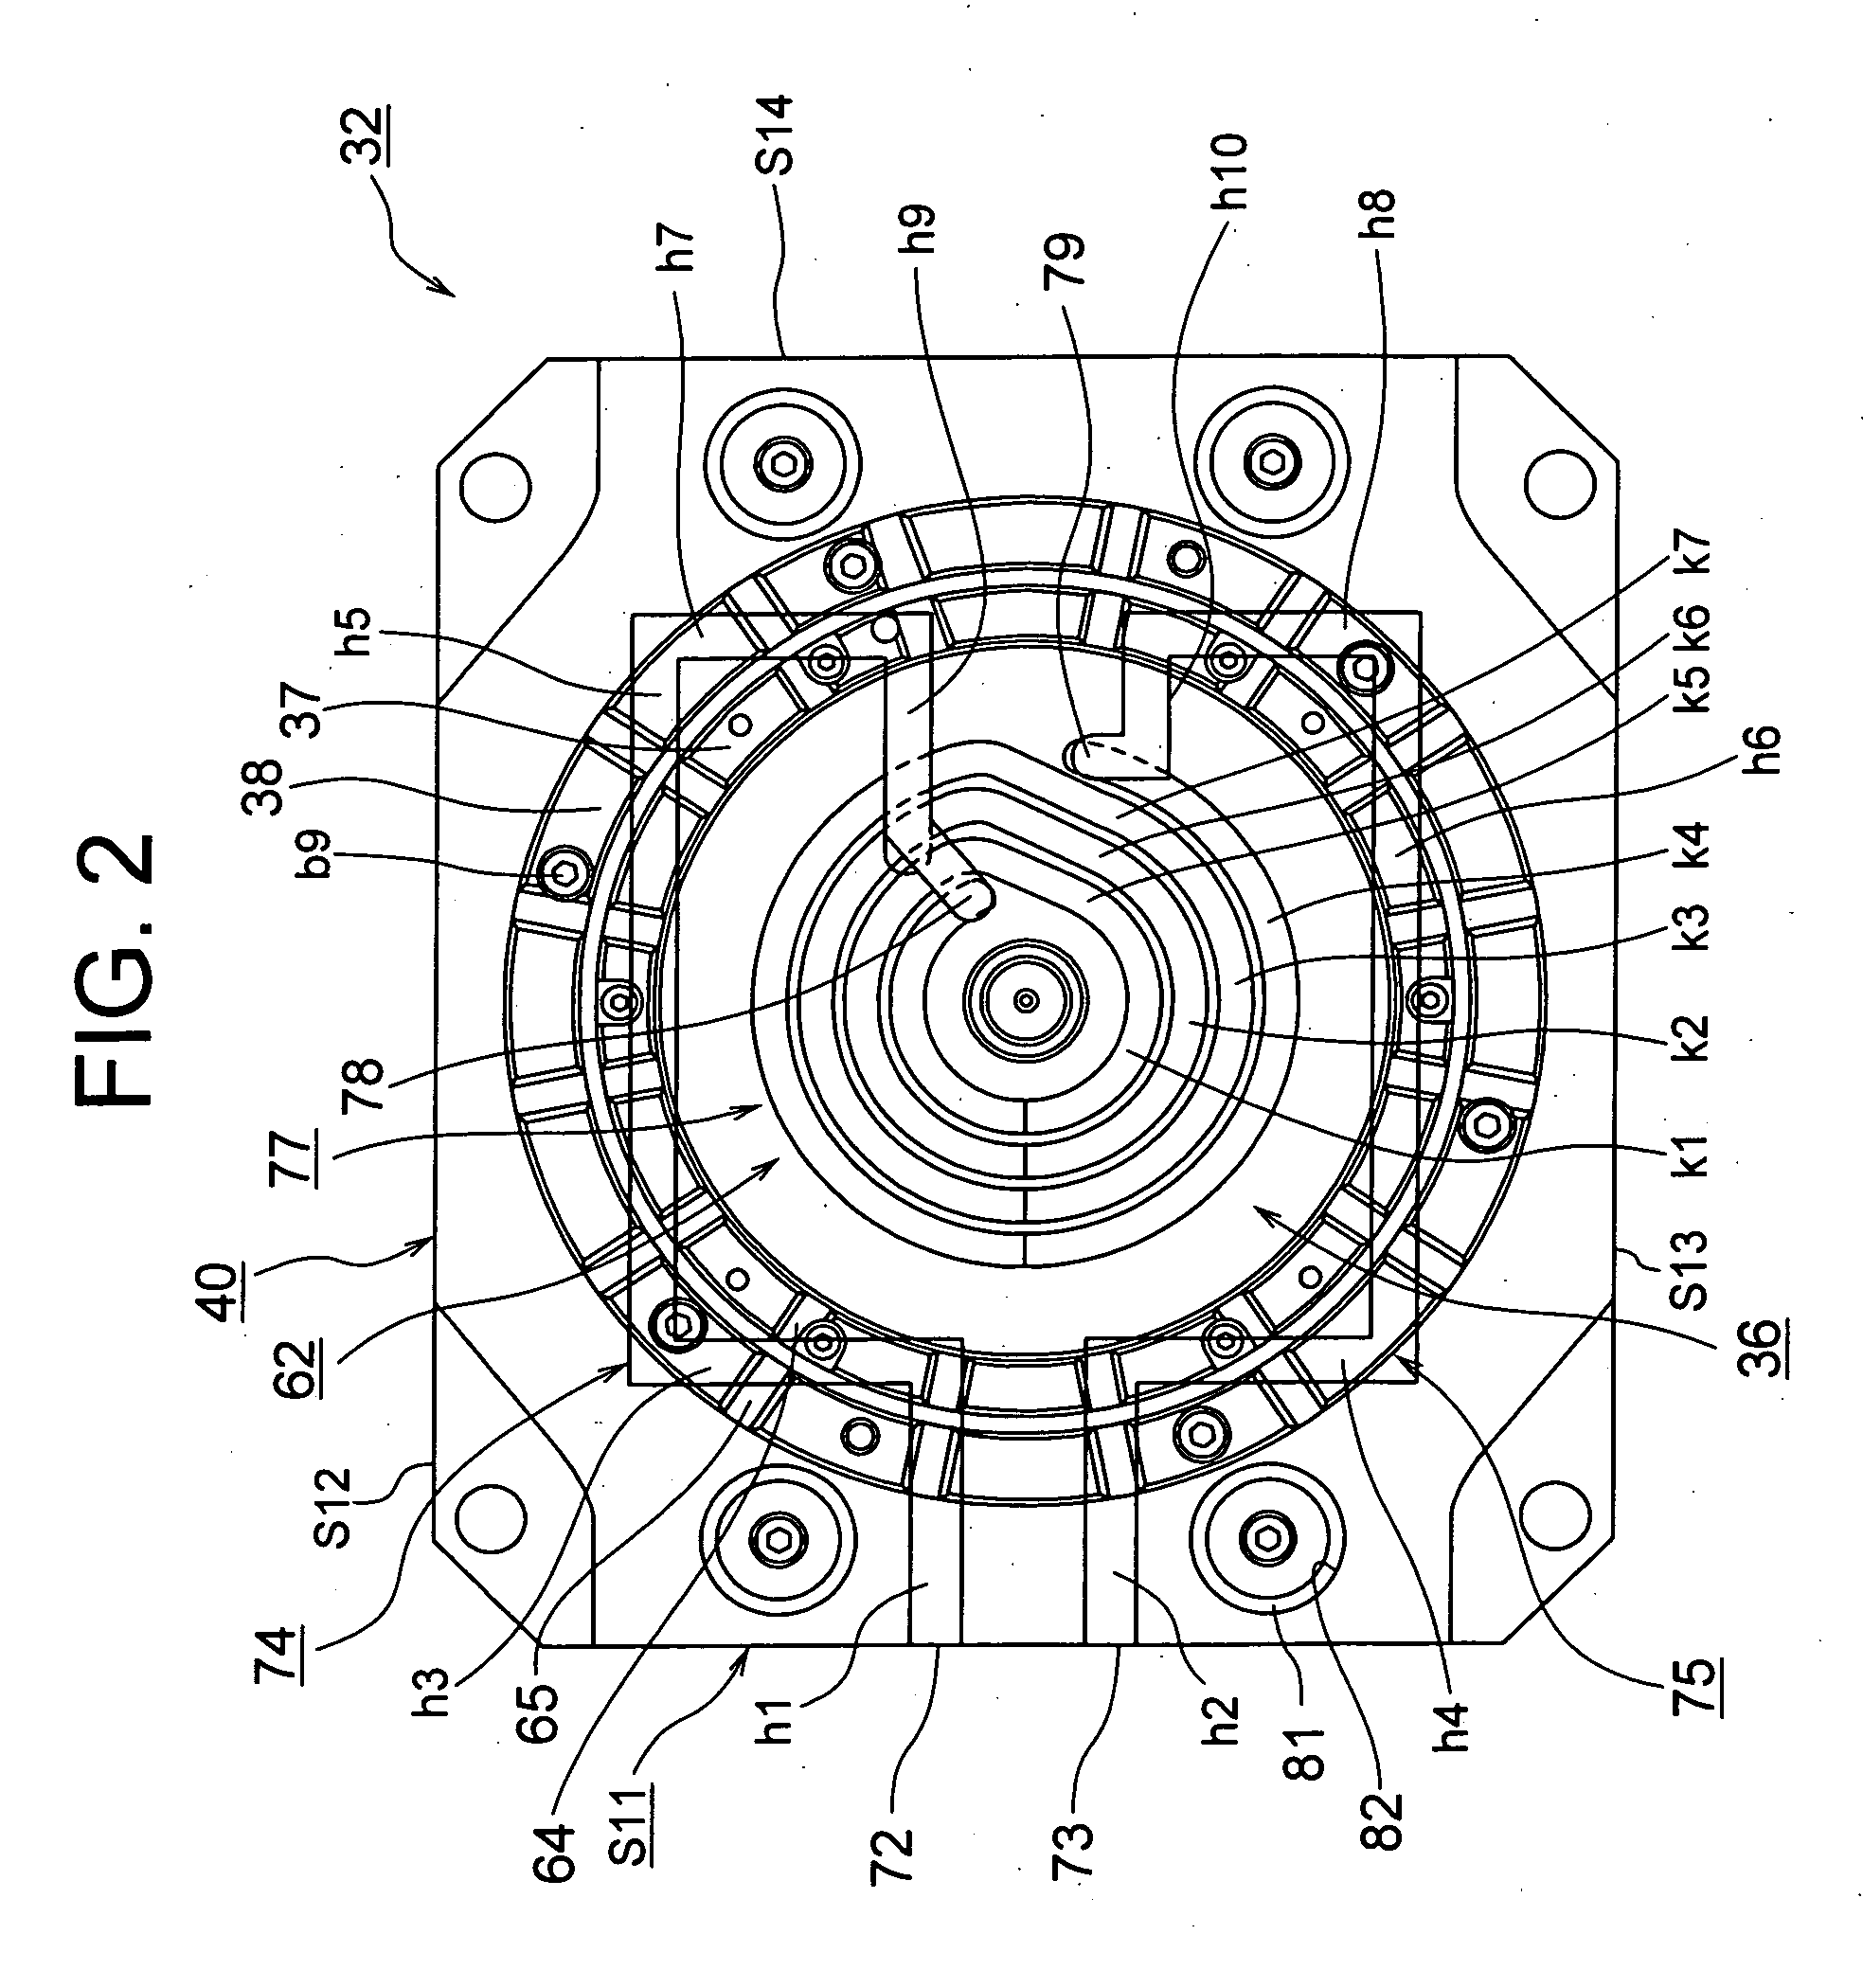 Disc-molding mold molded product and moloding machine